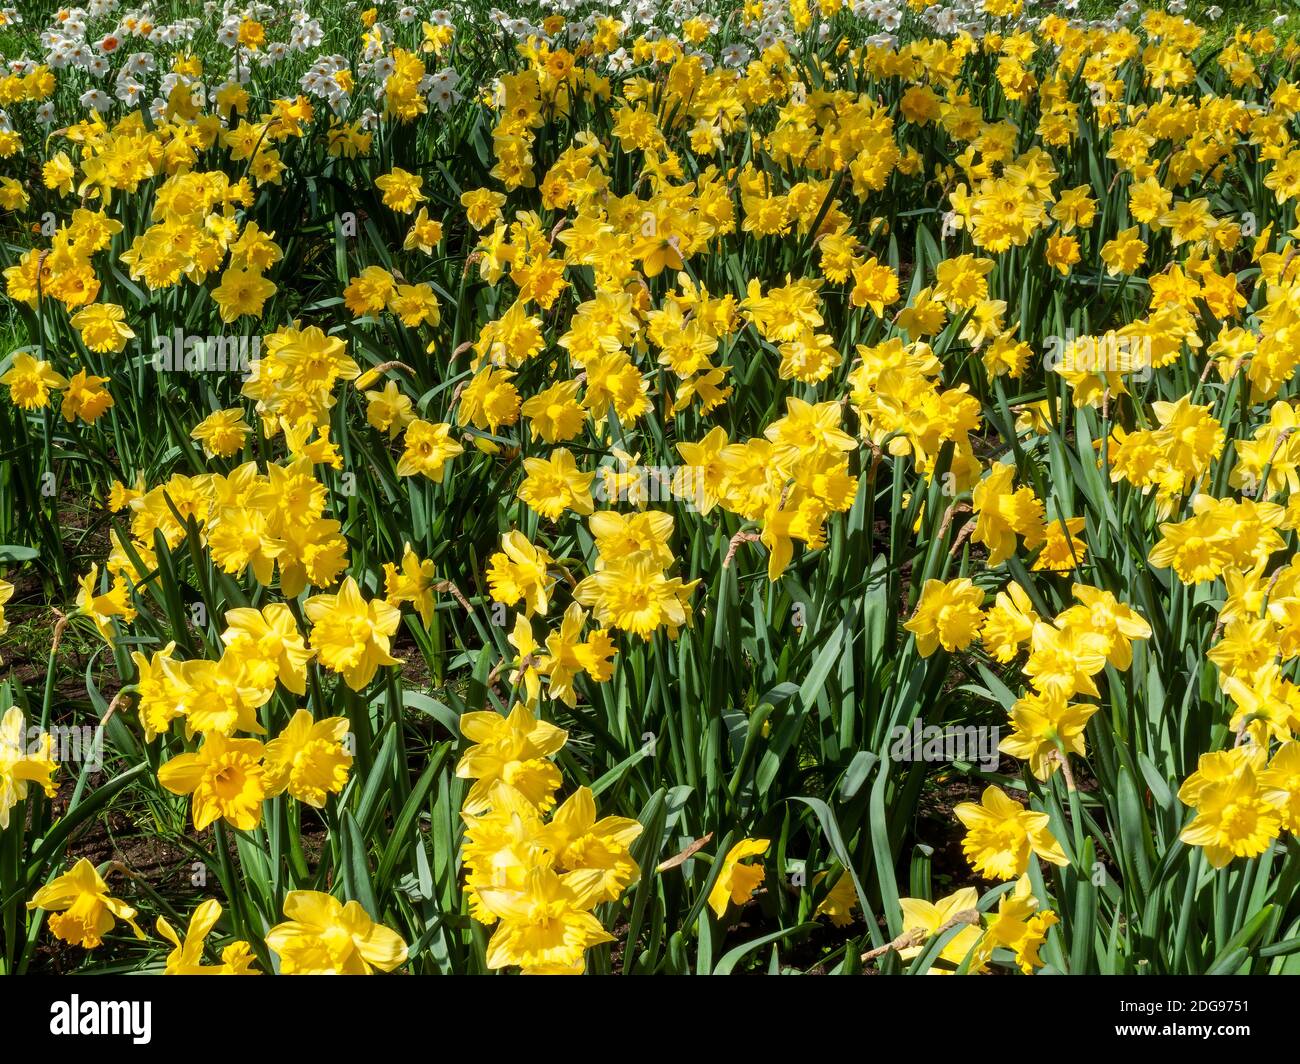 Daffodils (narcissus)  a springtime yellow flower bulb plant growing outdoors in a public park during the spring season, stock photo image Stock Photo